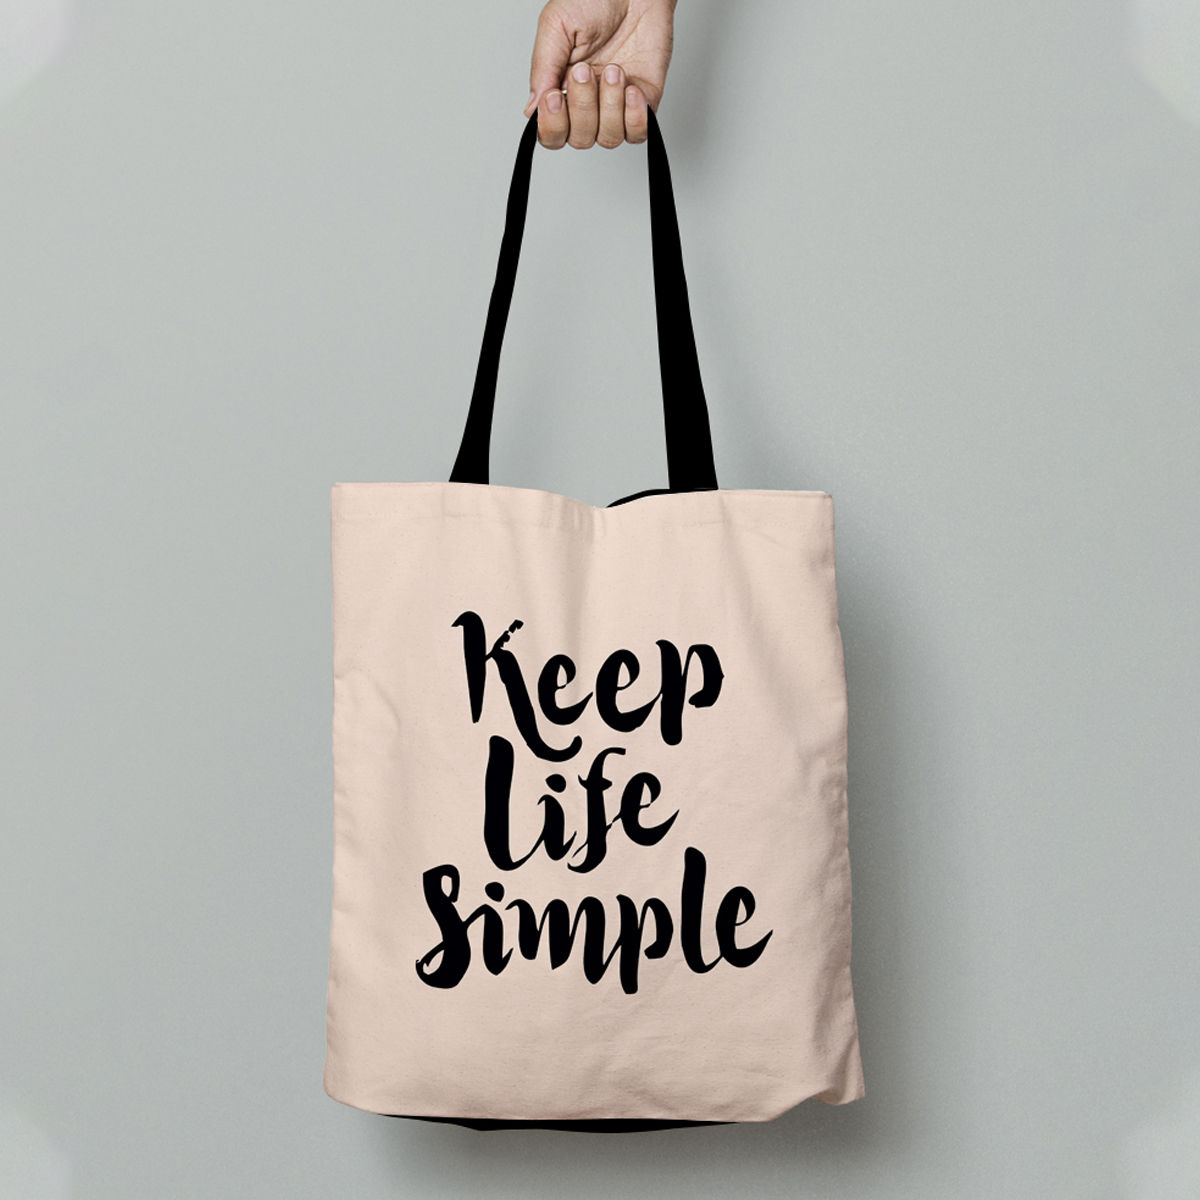 Crazy Corner I an not a Plastic Bag Tote Bag Buy Crazy Corner I an not a  Plastic Bag Tote Bag Online at Best Price in India  Nykaa